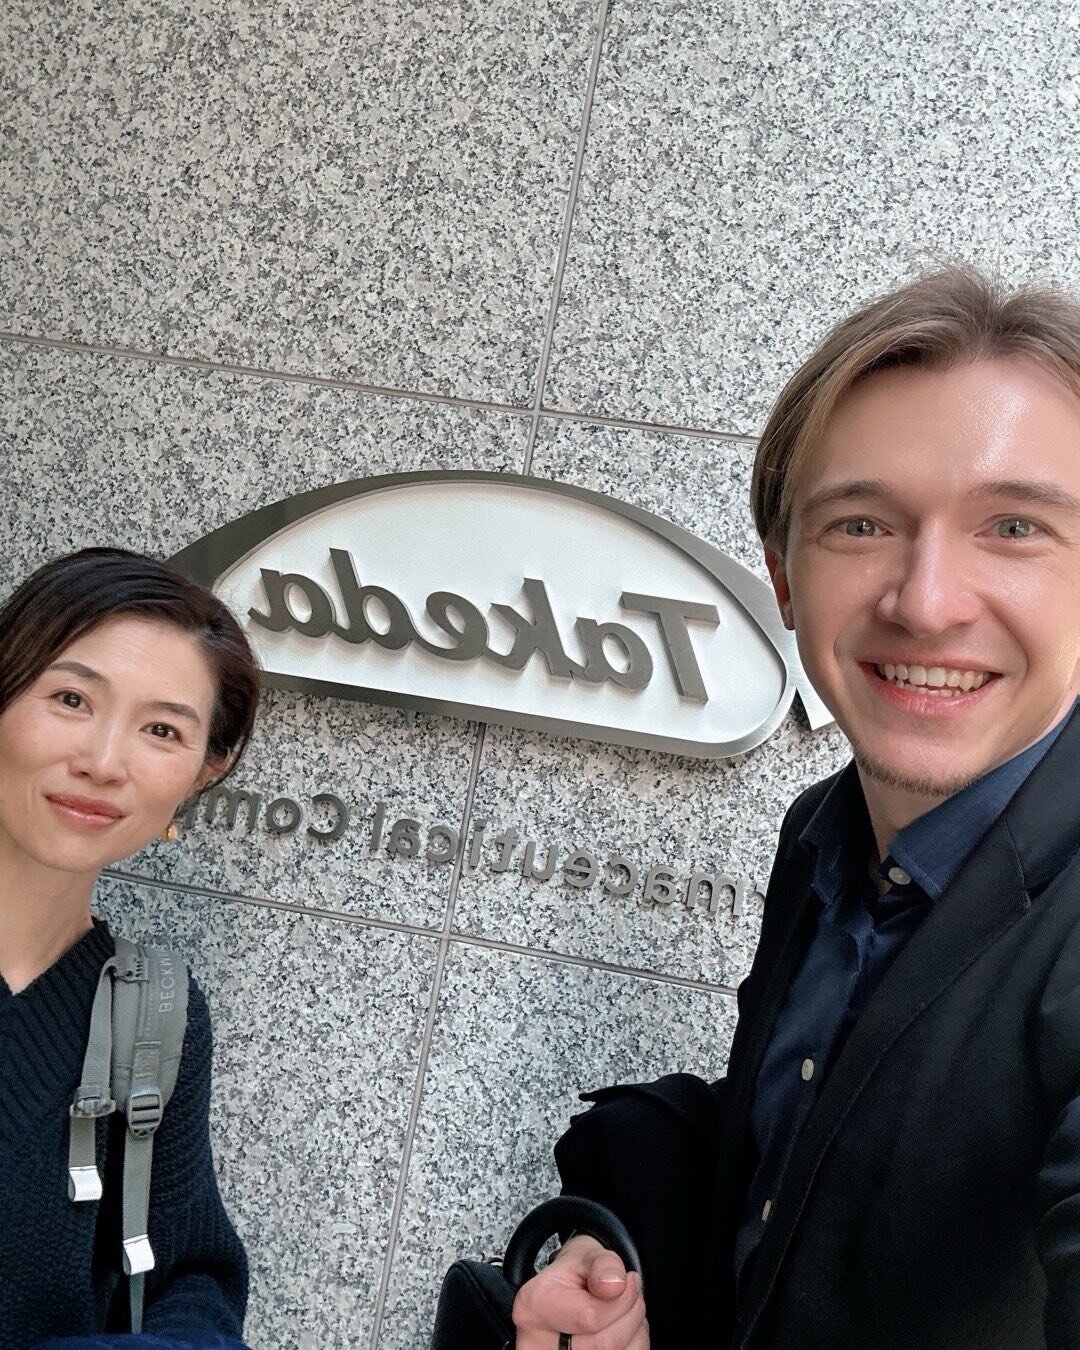 ⛩️ Wrapping up the week with a visit to Takeda Pharmaceuticals to discuss our joint session during the Nordic Healthtech delegation to Japan (Apr 22-25).

Interested in the delegation? 

See details below👇 

✅https://ow.ly/5C5950R4Nwh

#NordicMade
#